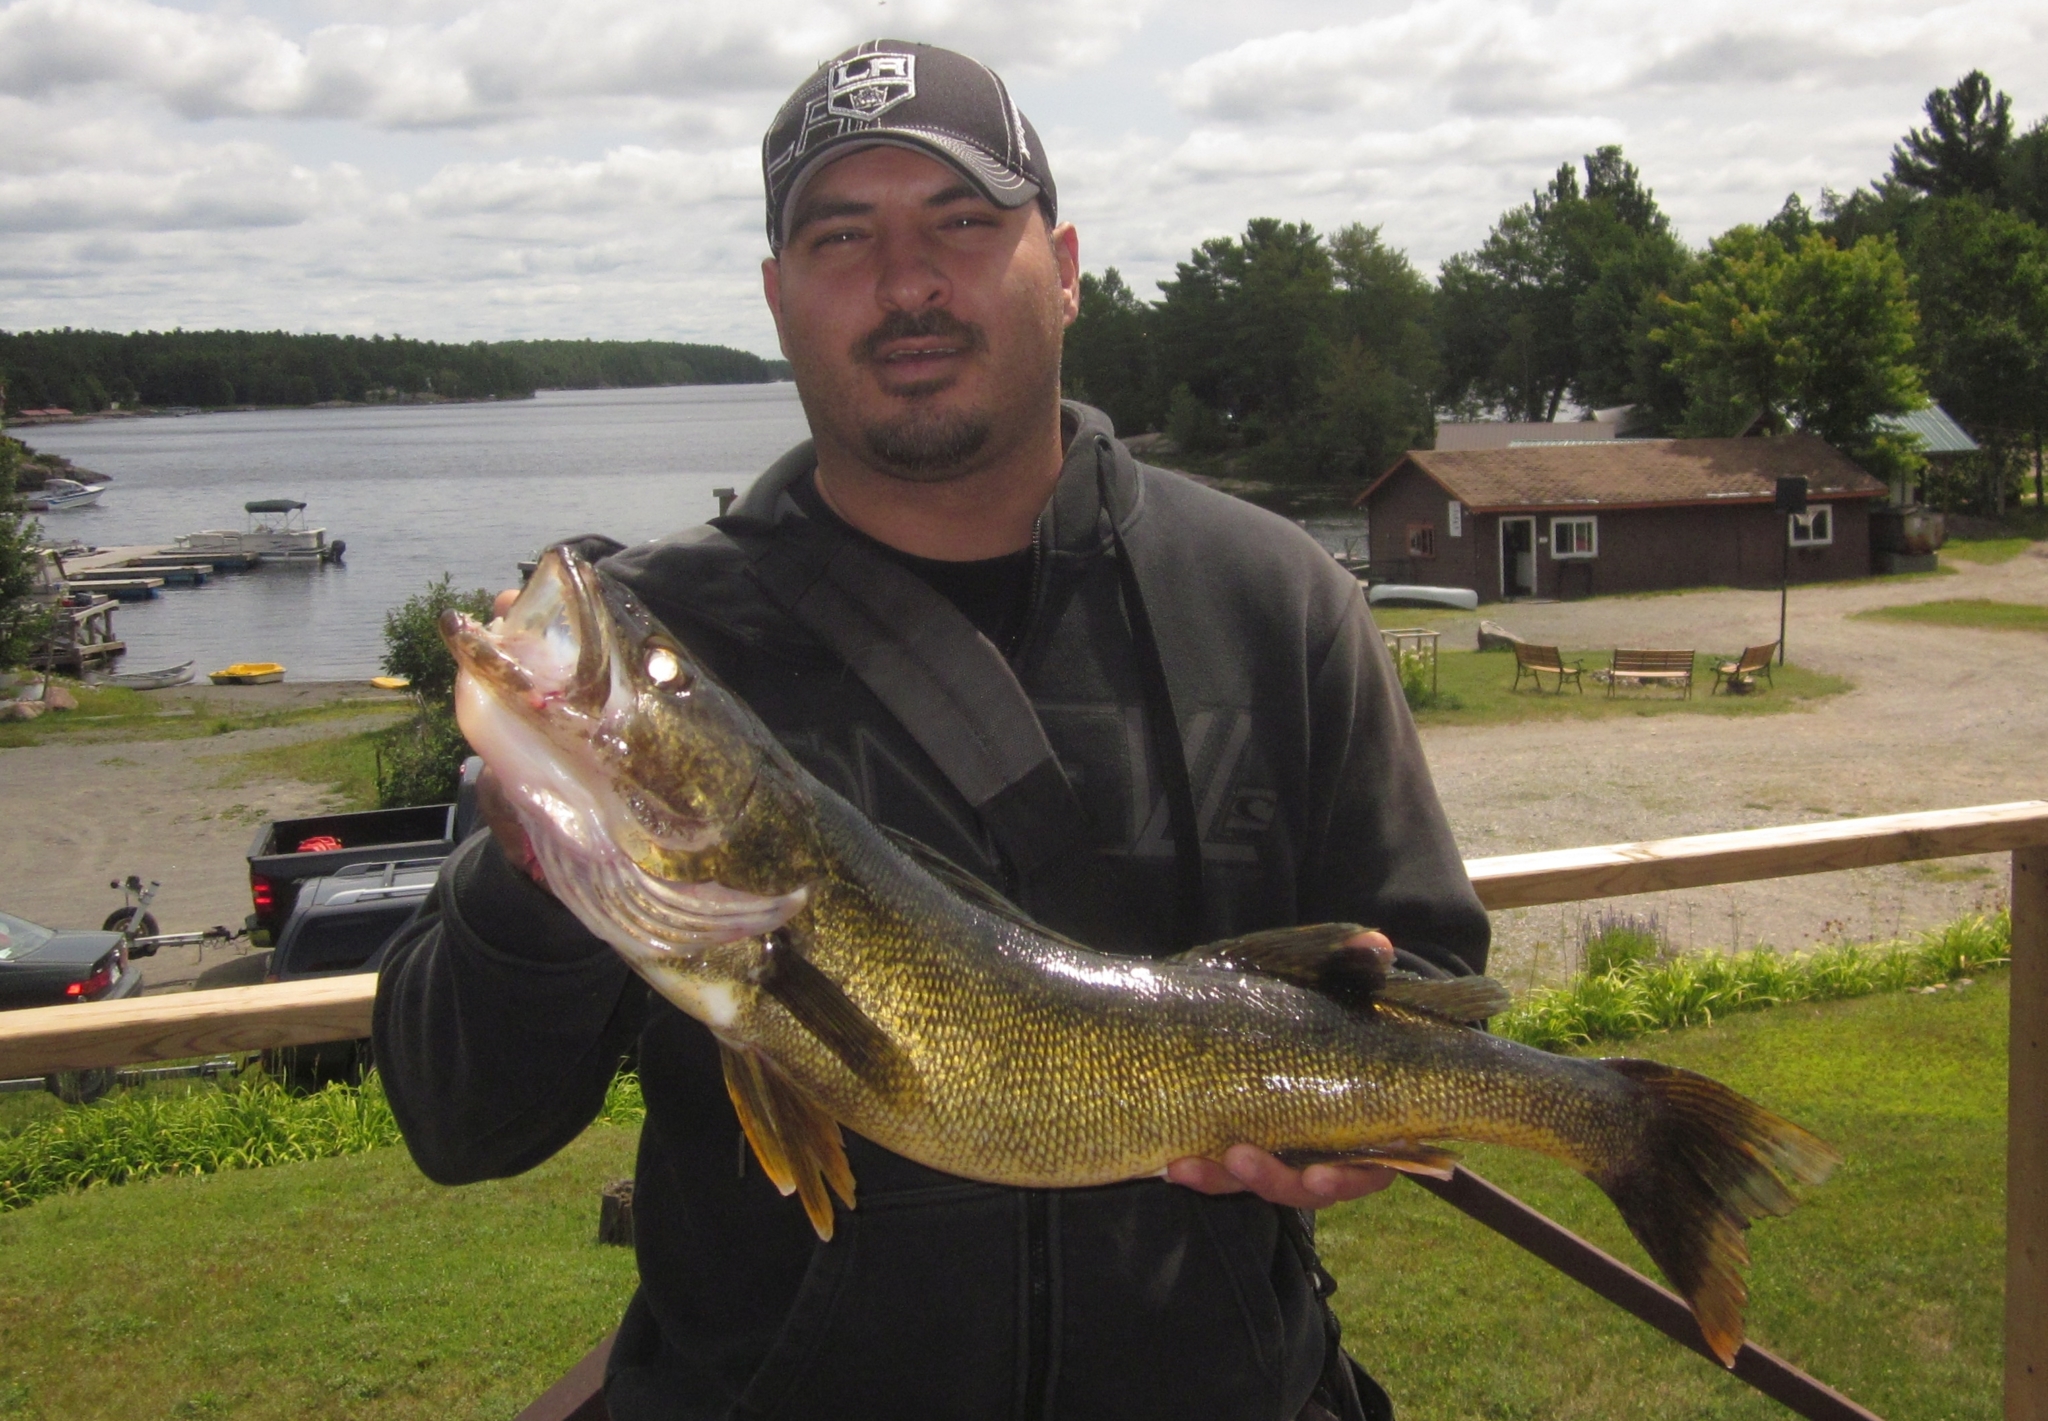 Mike holding 28 inch walleye.